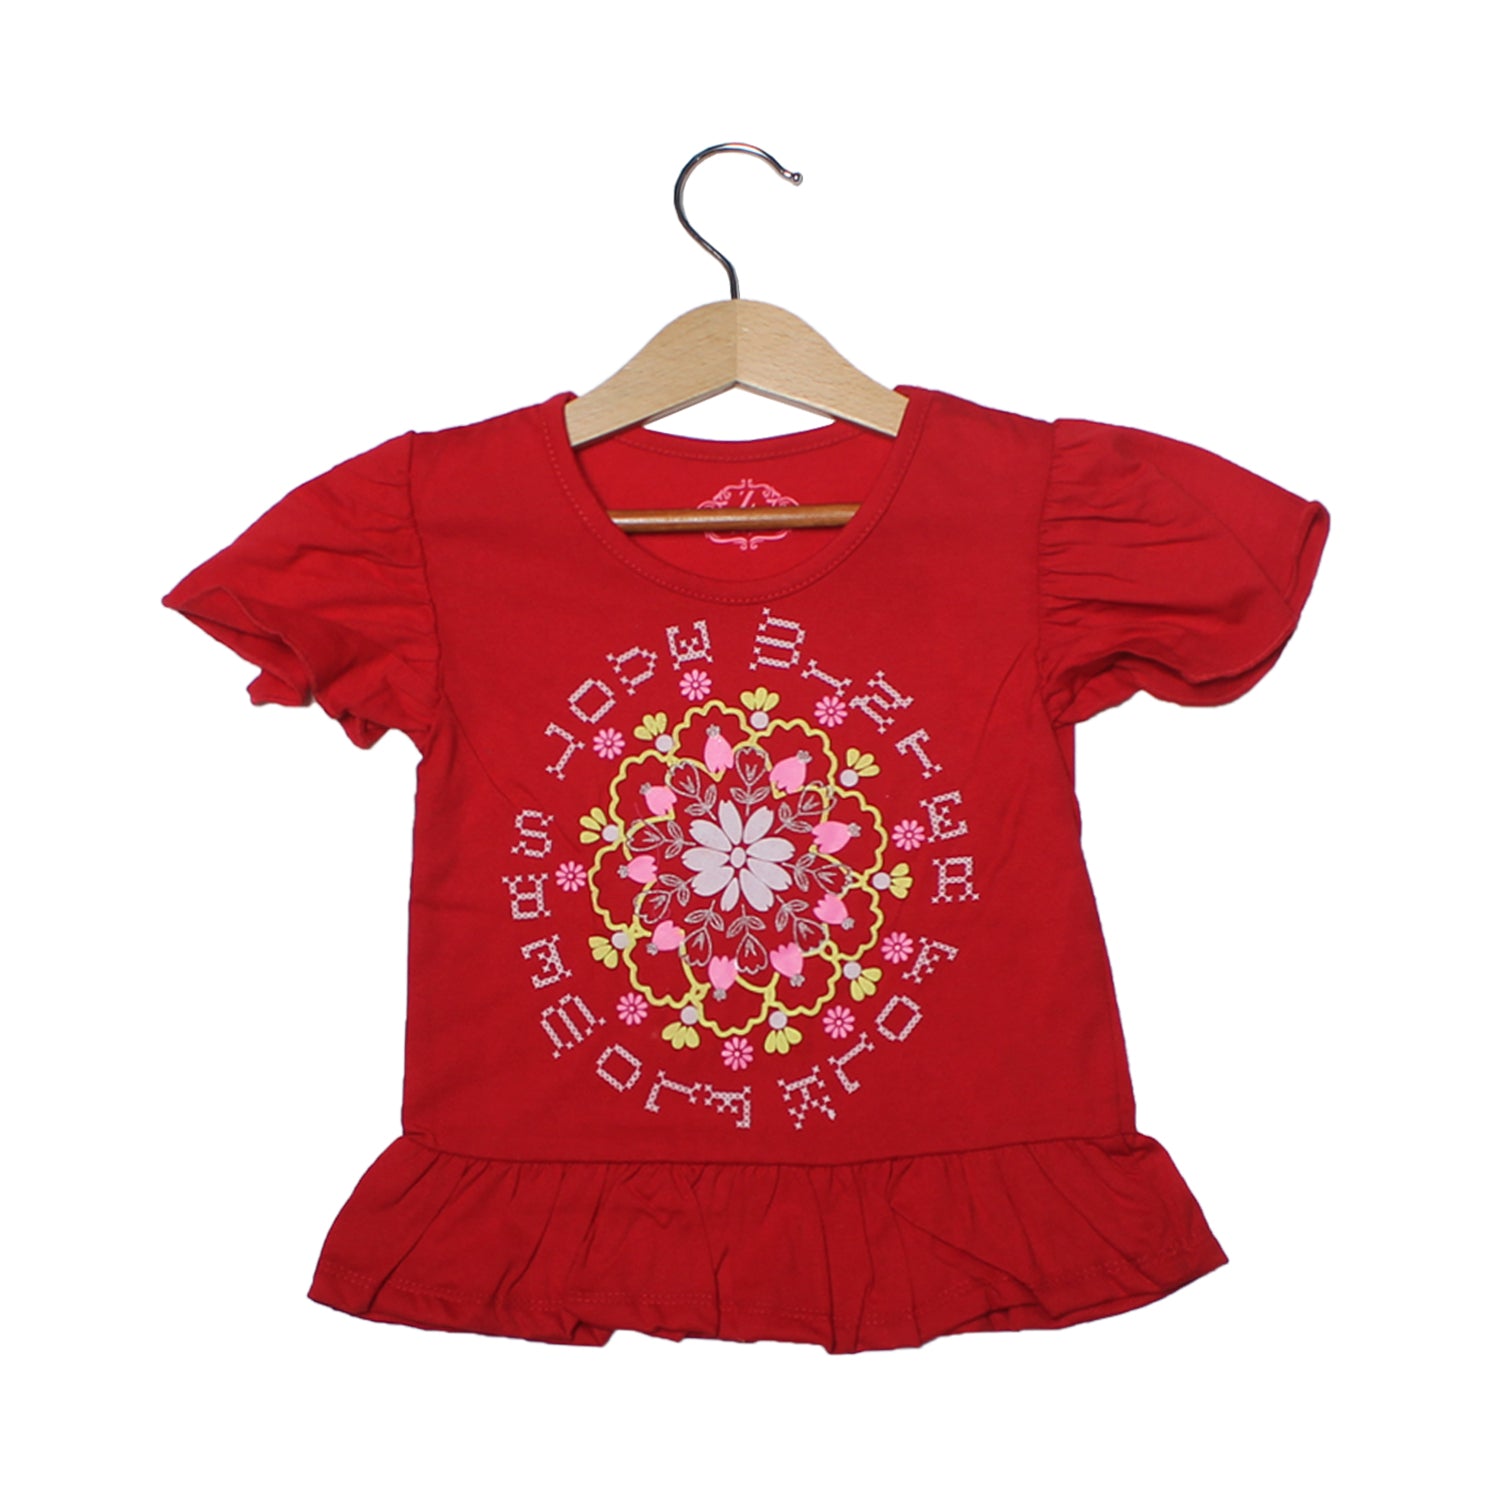 NEW RED ROUND FLOWER PRINTED T-SHIRT TOP FOR GIRLS